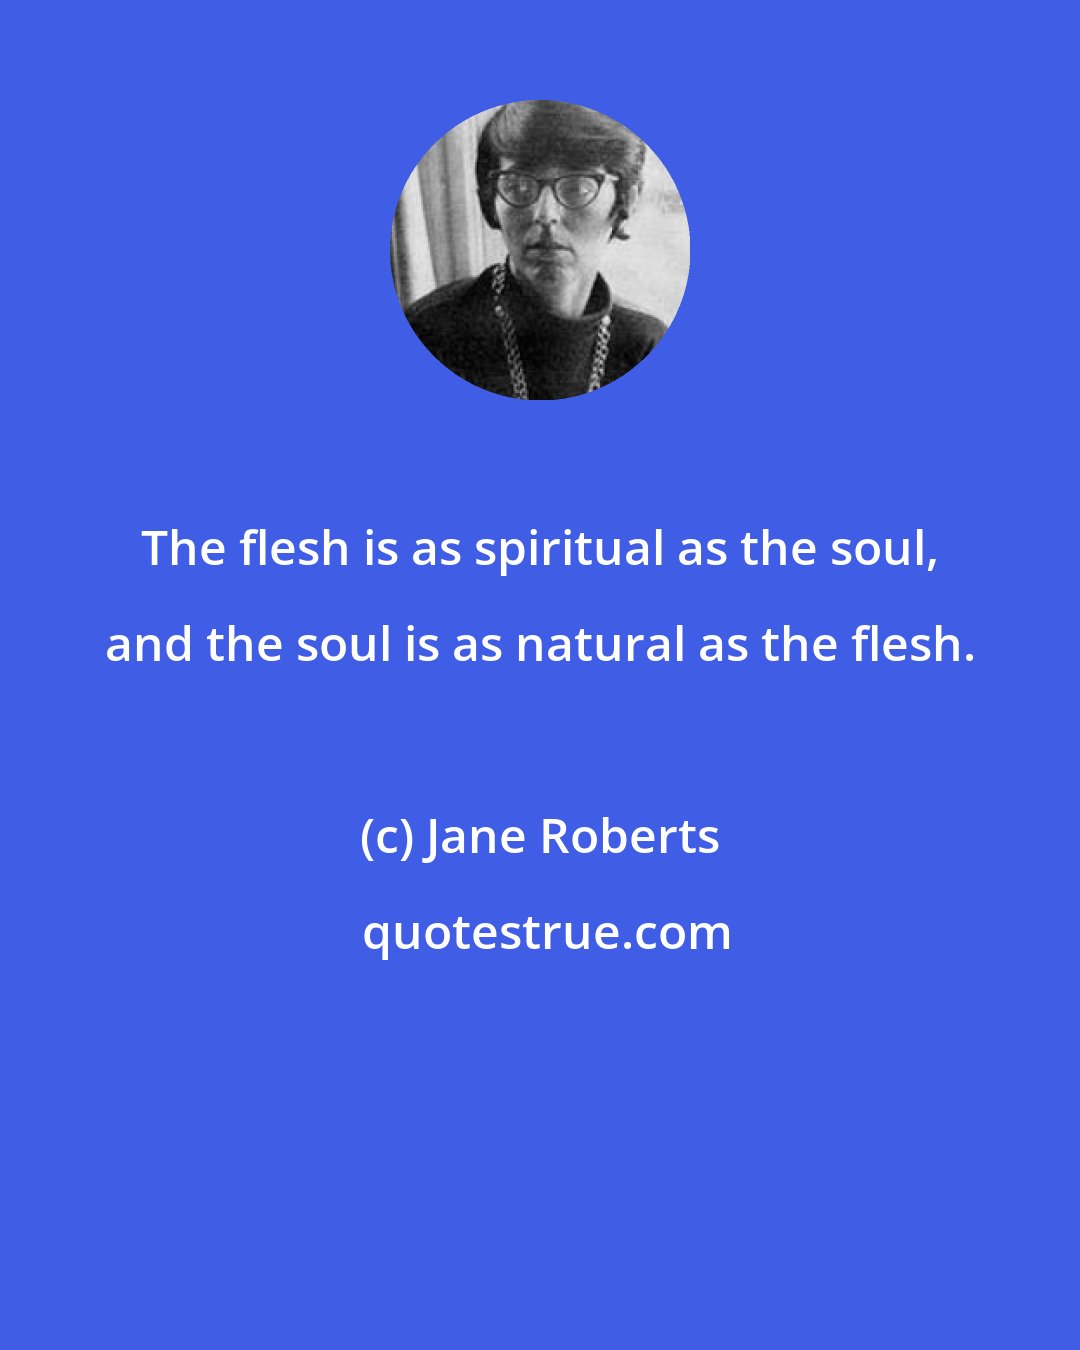 Jane Roberts: The flesh is as spiritual as the soul, and the soul is as natural as the flesh.